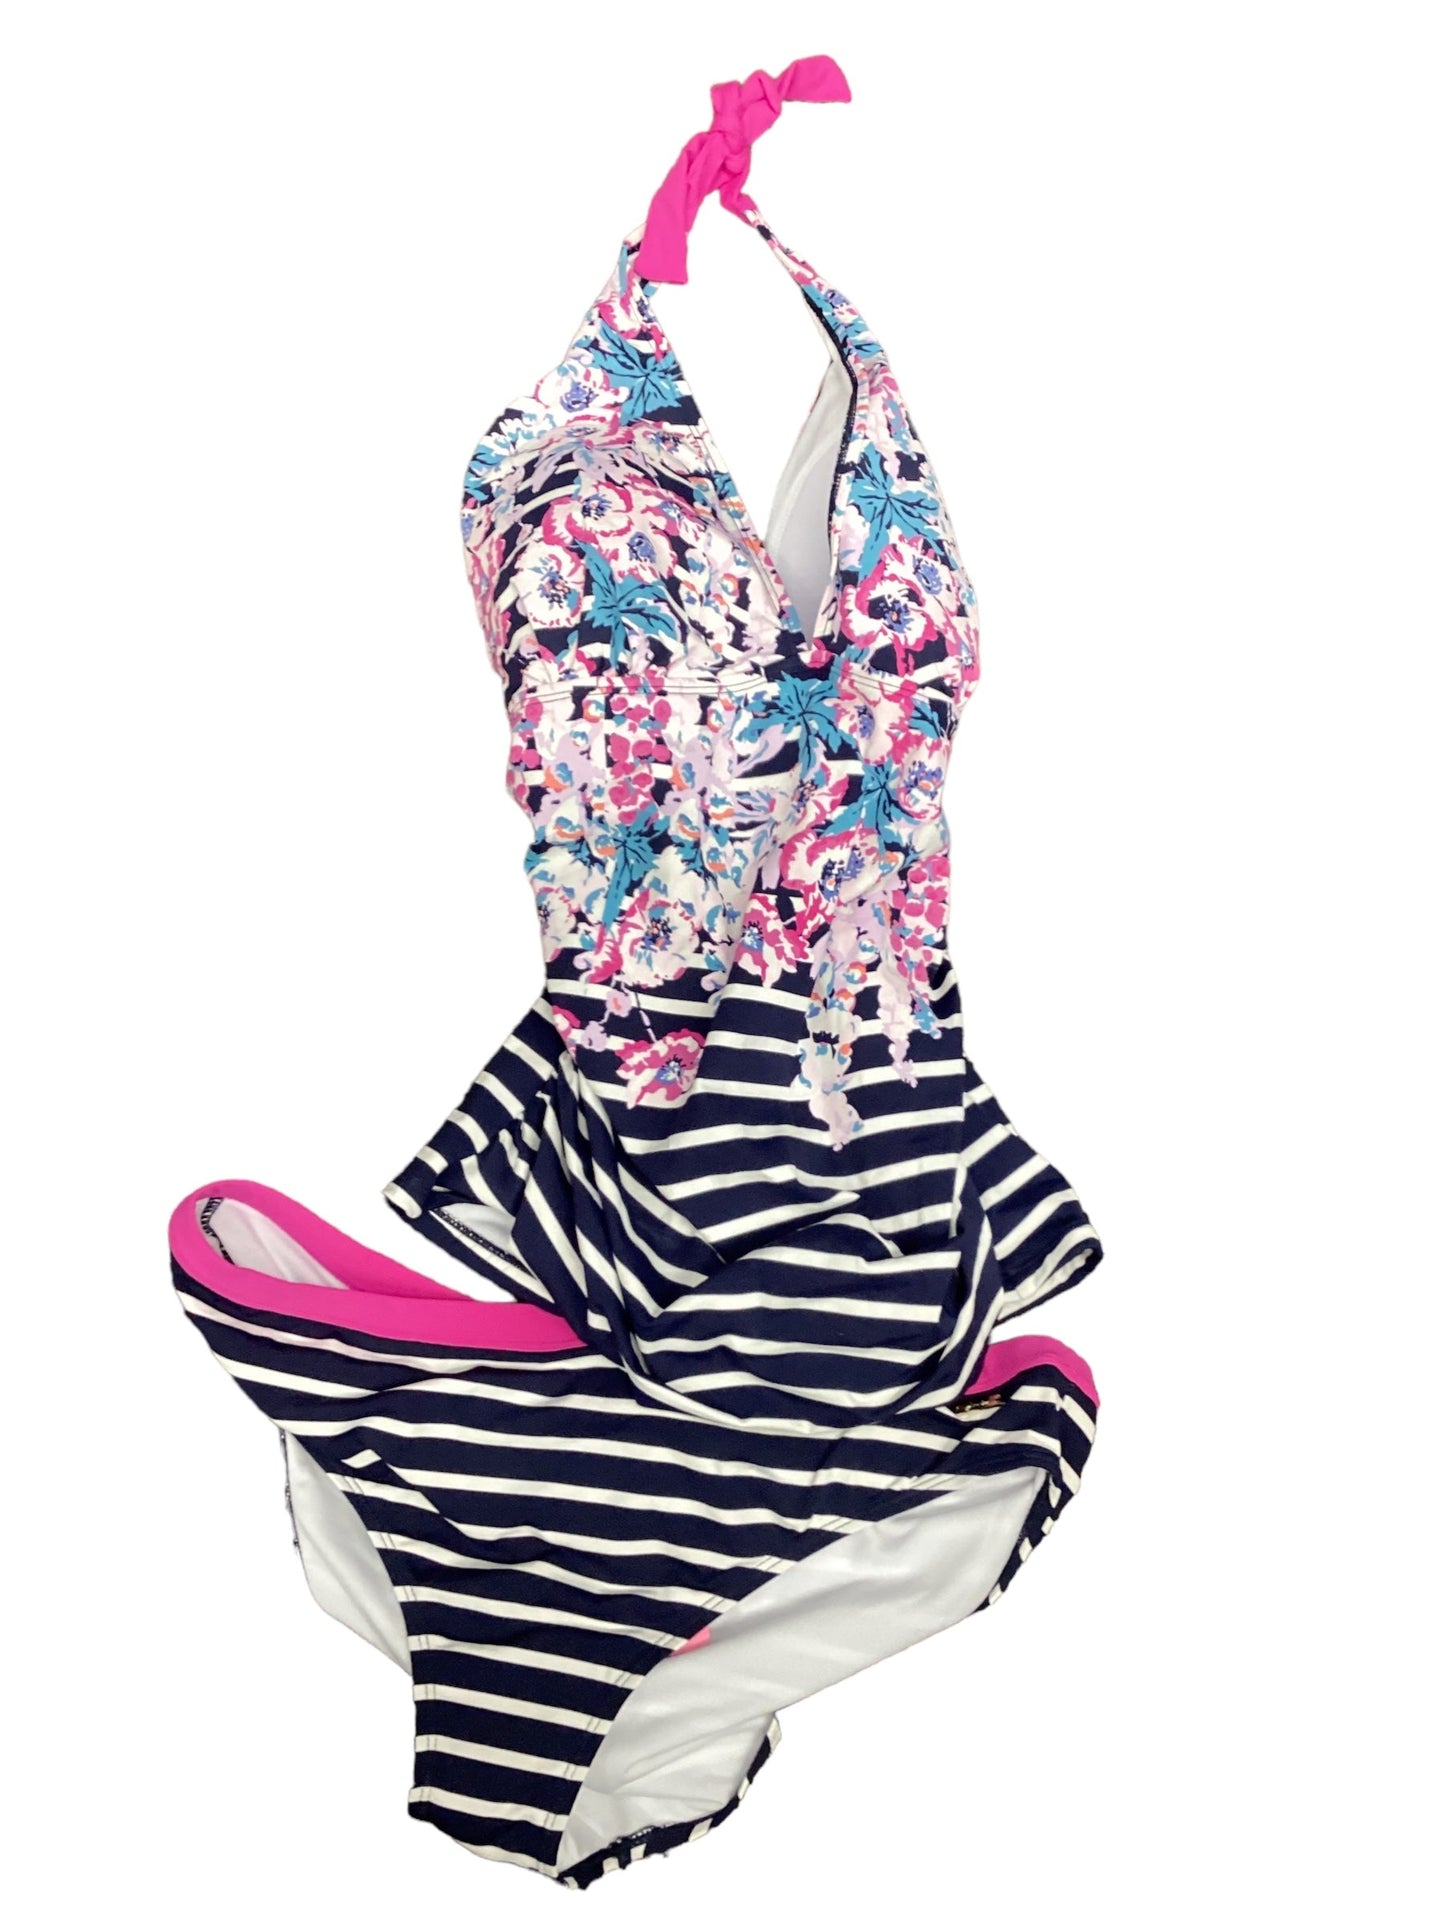 Striped Pattern Swimsuit 2pc Joules, Size 12